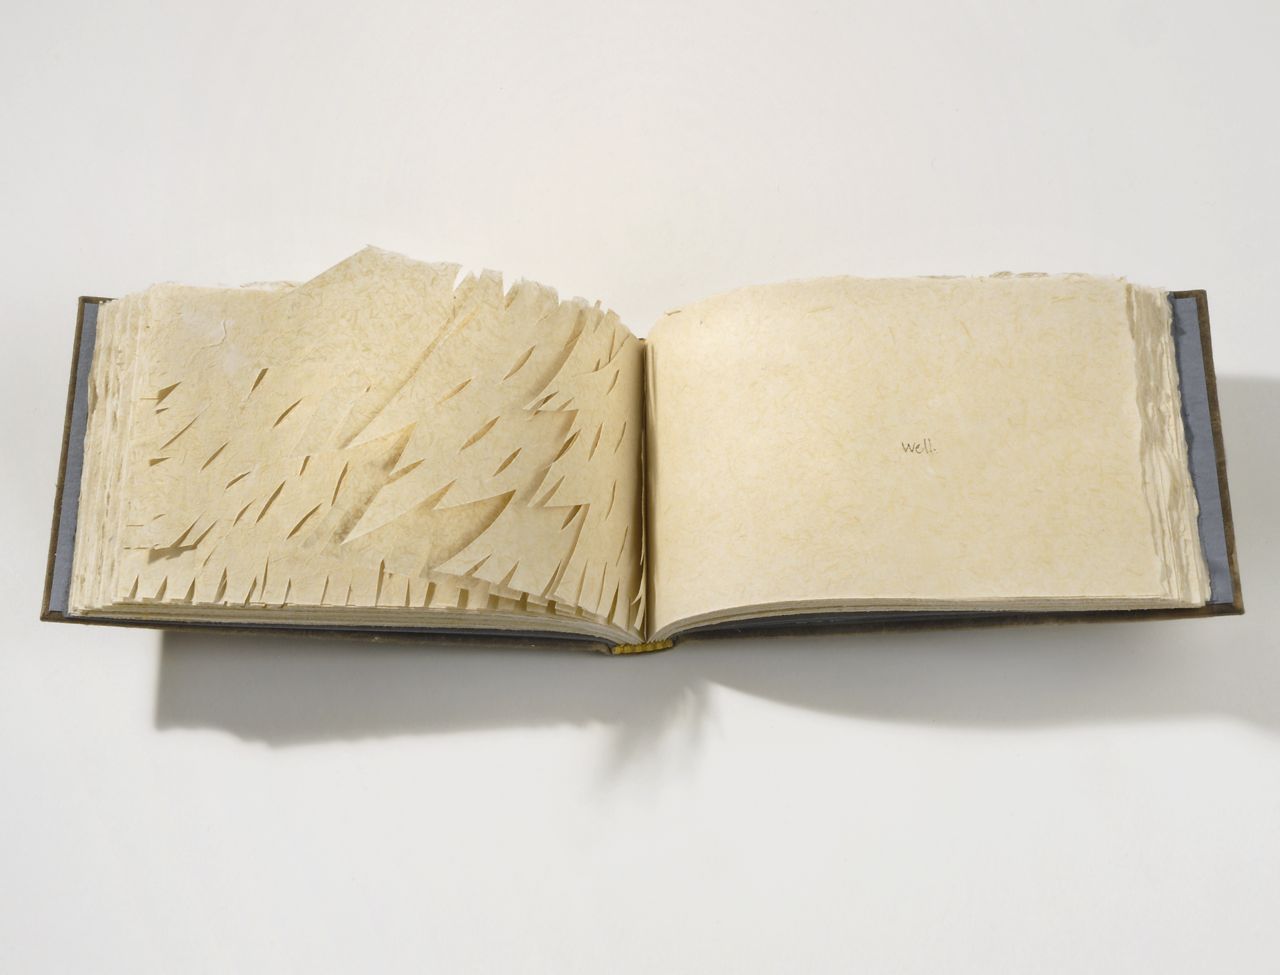 I'd like a home (2007). Handmade abaca and milkweed paper, papercuts and pen, 72 pages. 4.25 x 7 x 1". Oberlin College Art Library Collection.